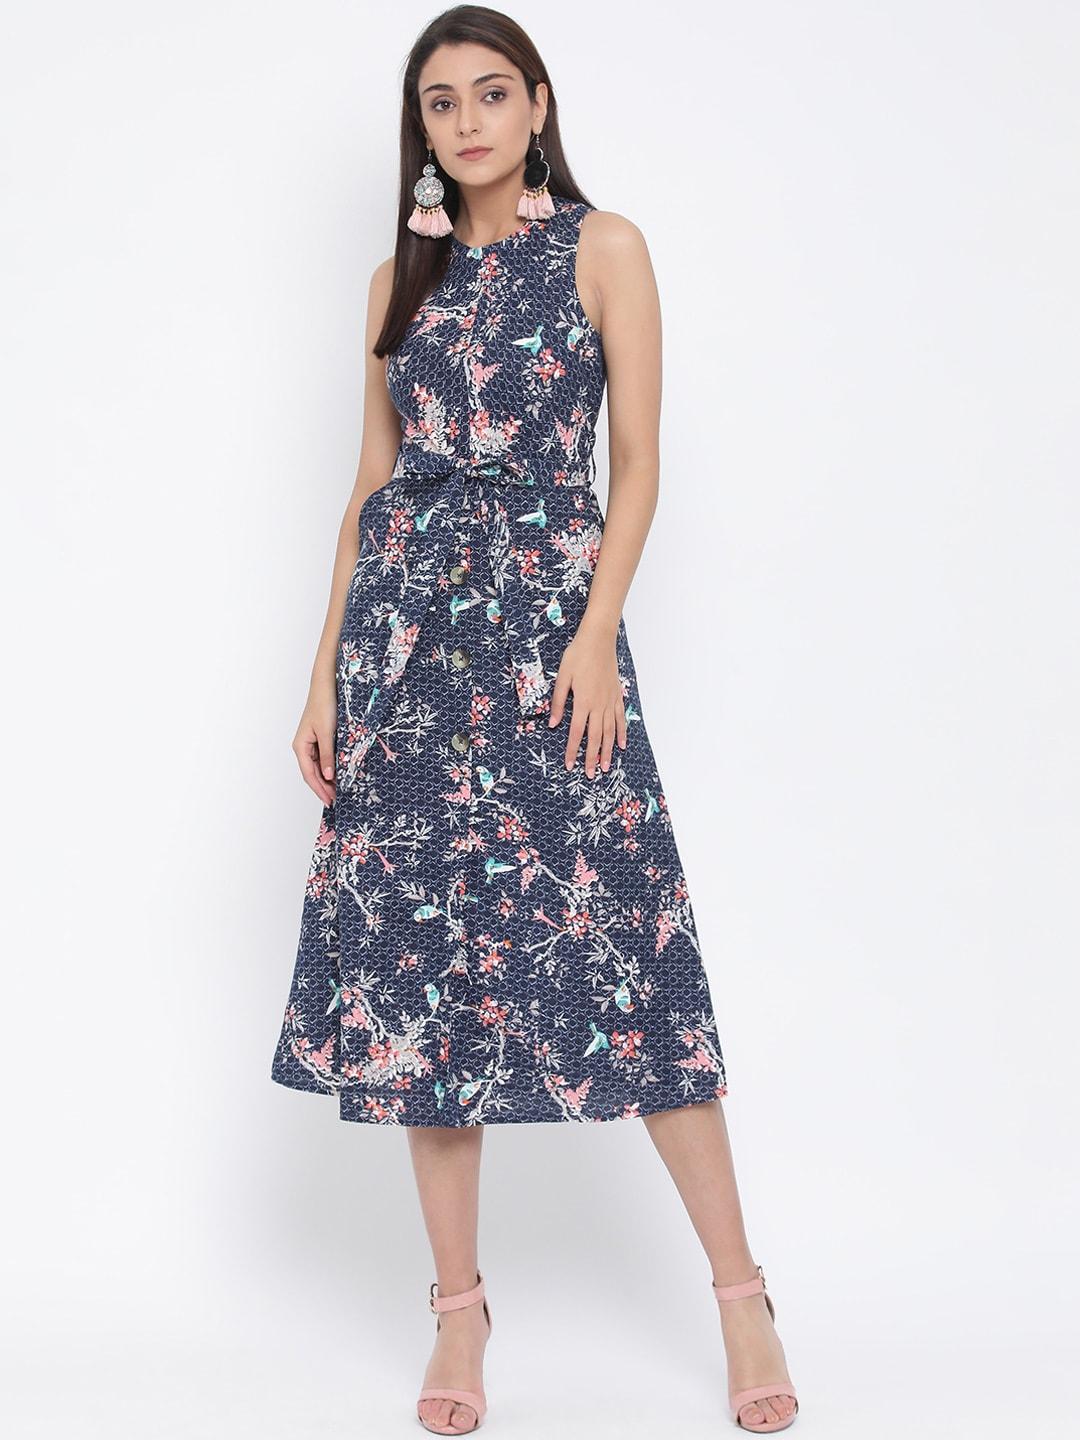 oxolloxo-women-navy-blue-printed-fit-and-flare-dress